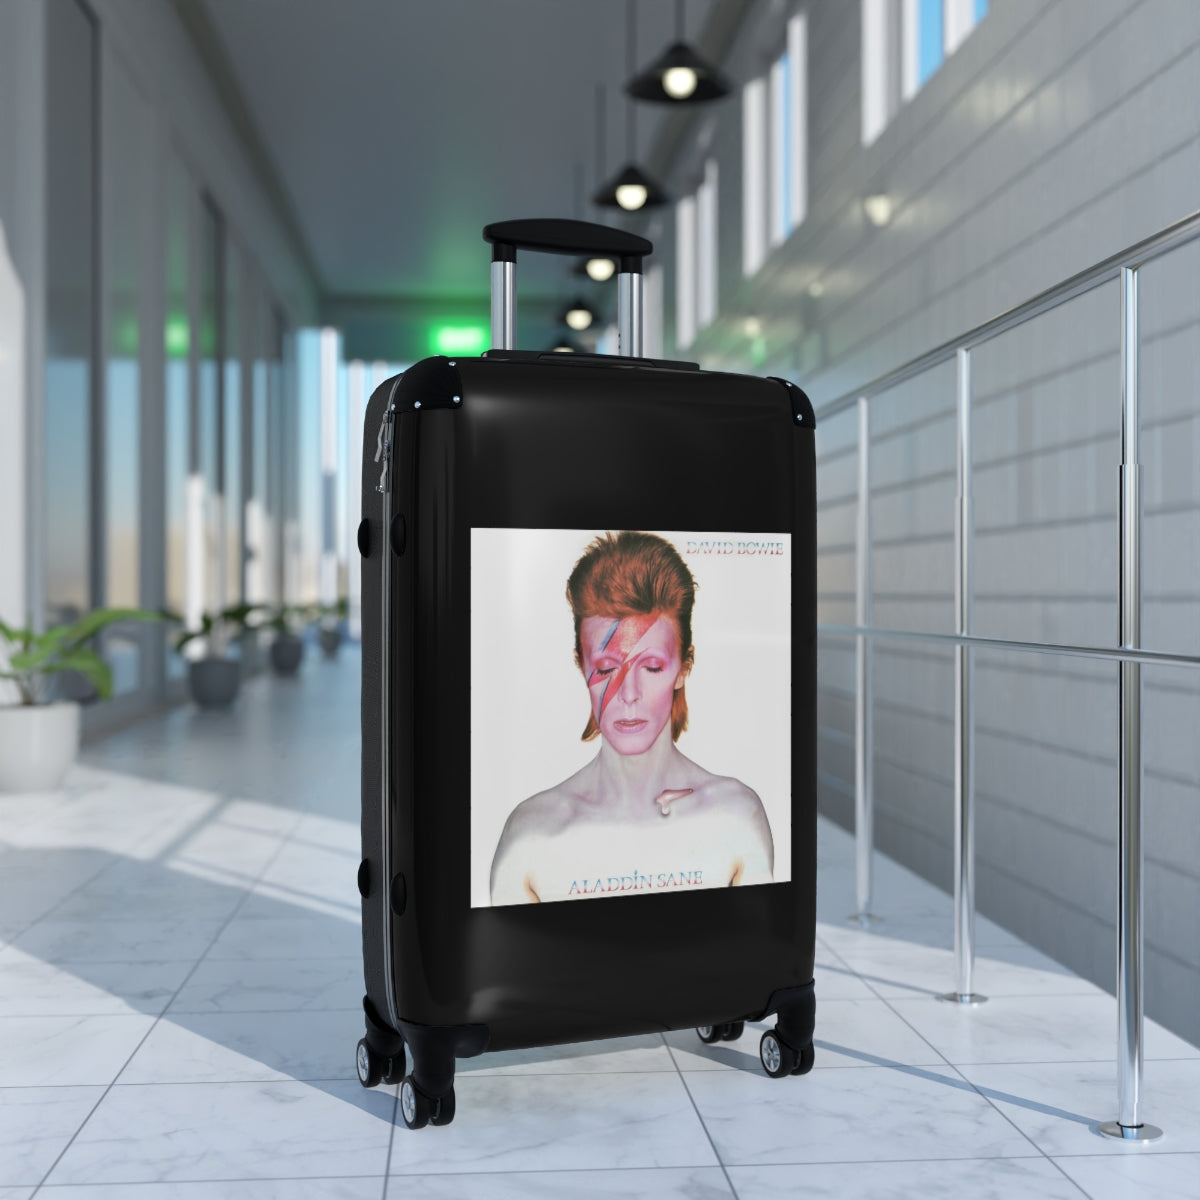 Getrott David Bowie Aladdin Sane 1973 Black Cabin Suitcase Inner Pockets Extended Storage Adjustable Telescopic Handle Inner Pockets Double wheeled Polycarbonate Hard-shell Built-in Lock